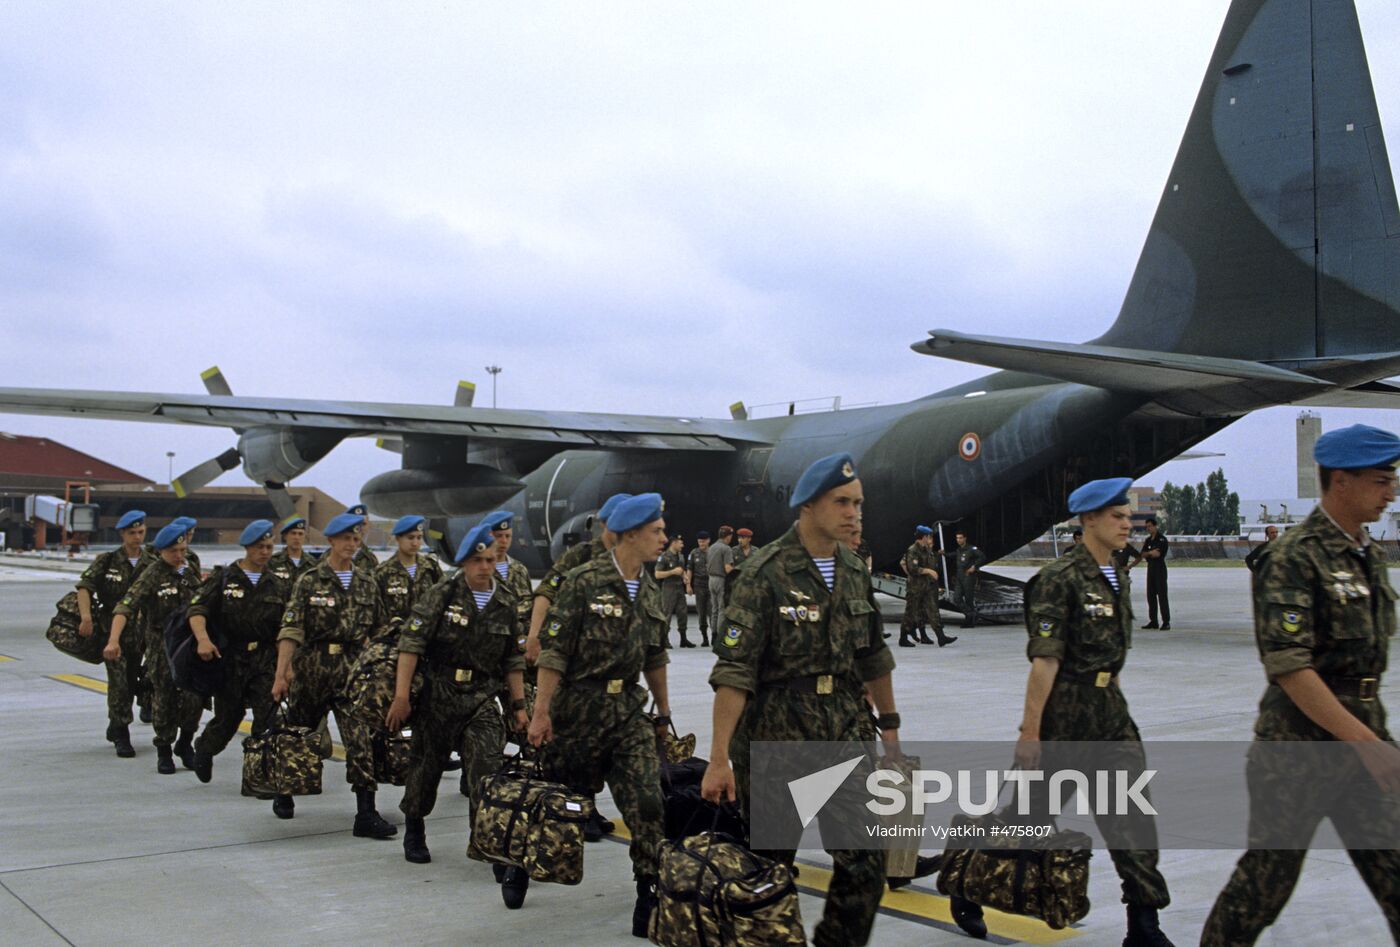 Russian paratroopers arrive in Toulouse